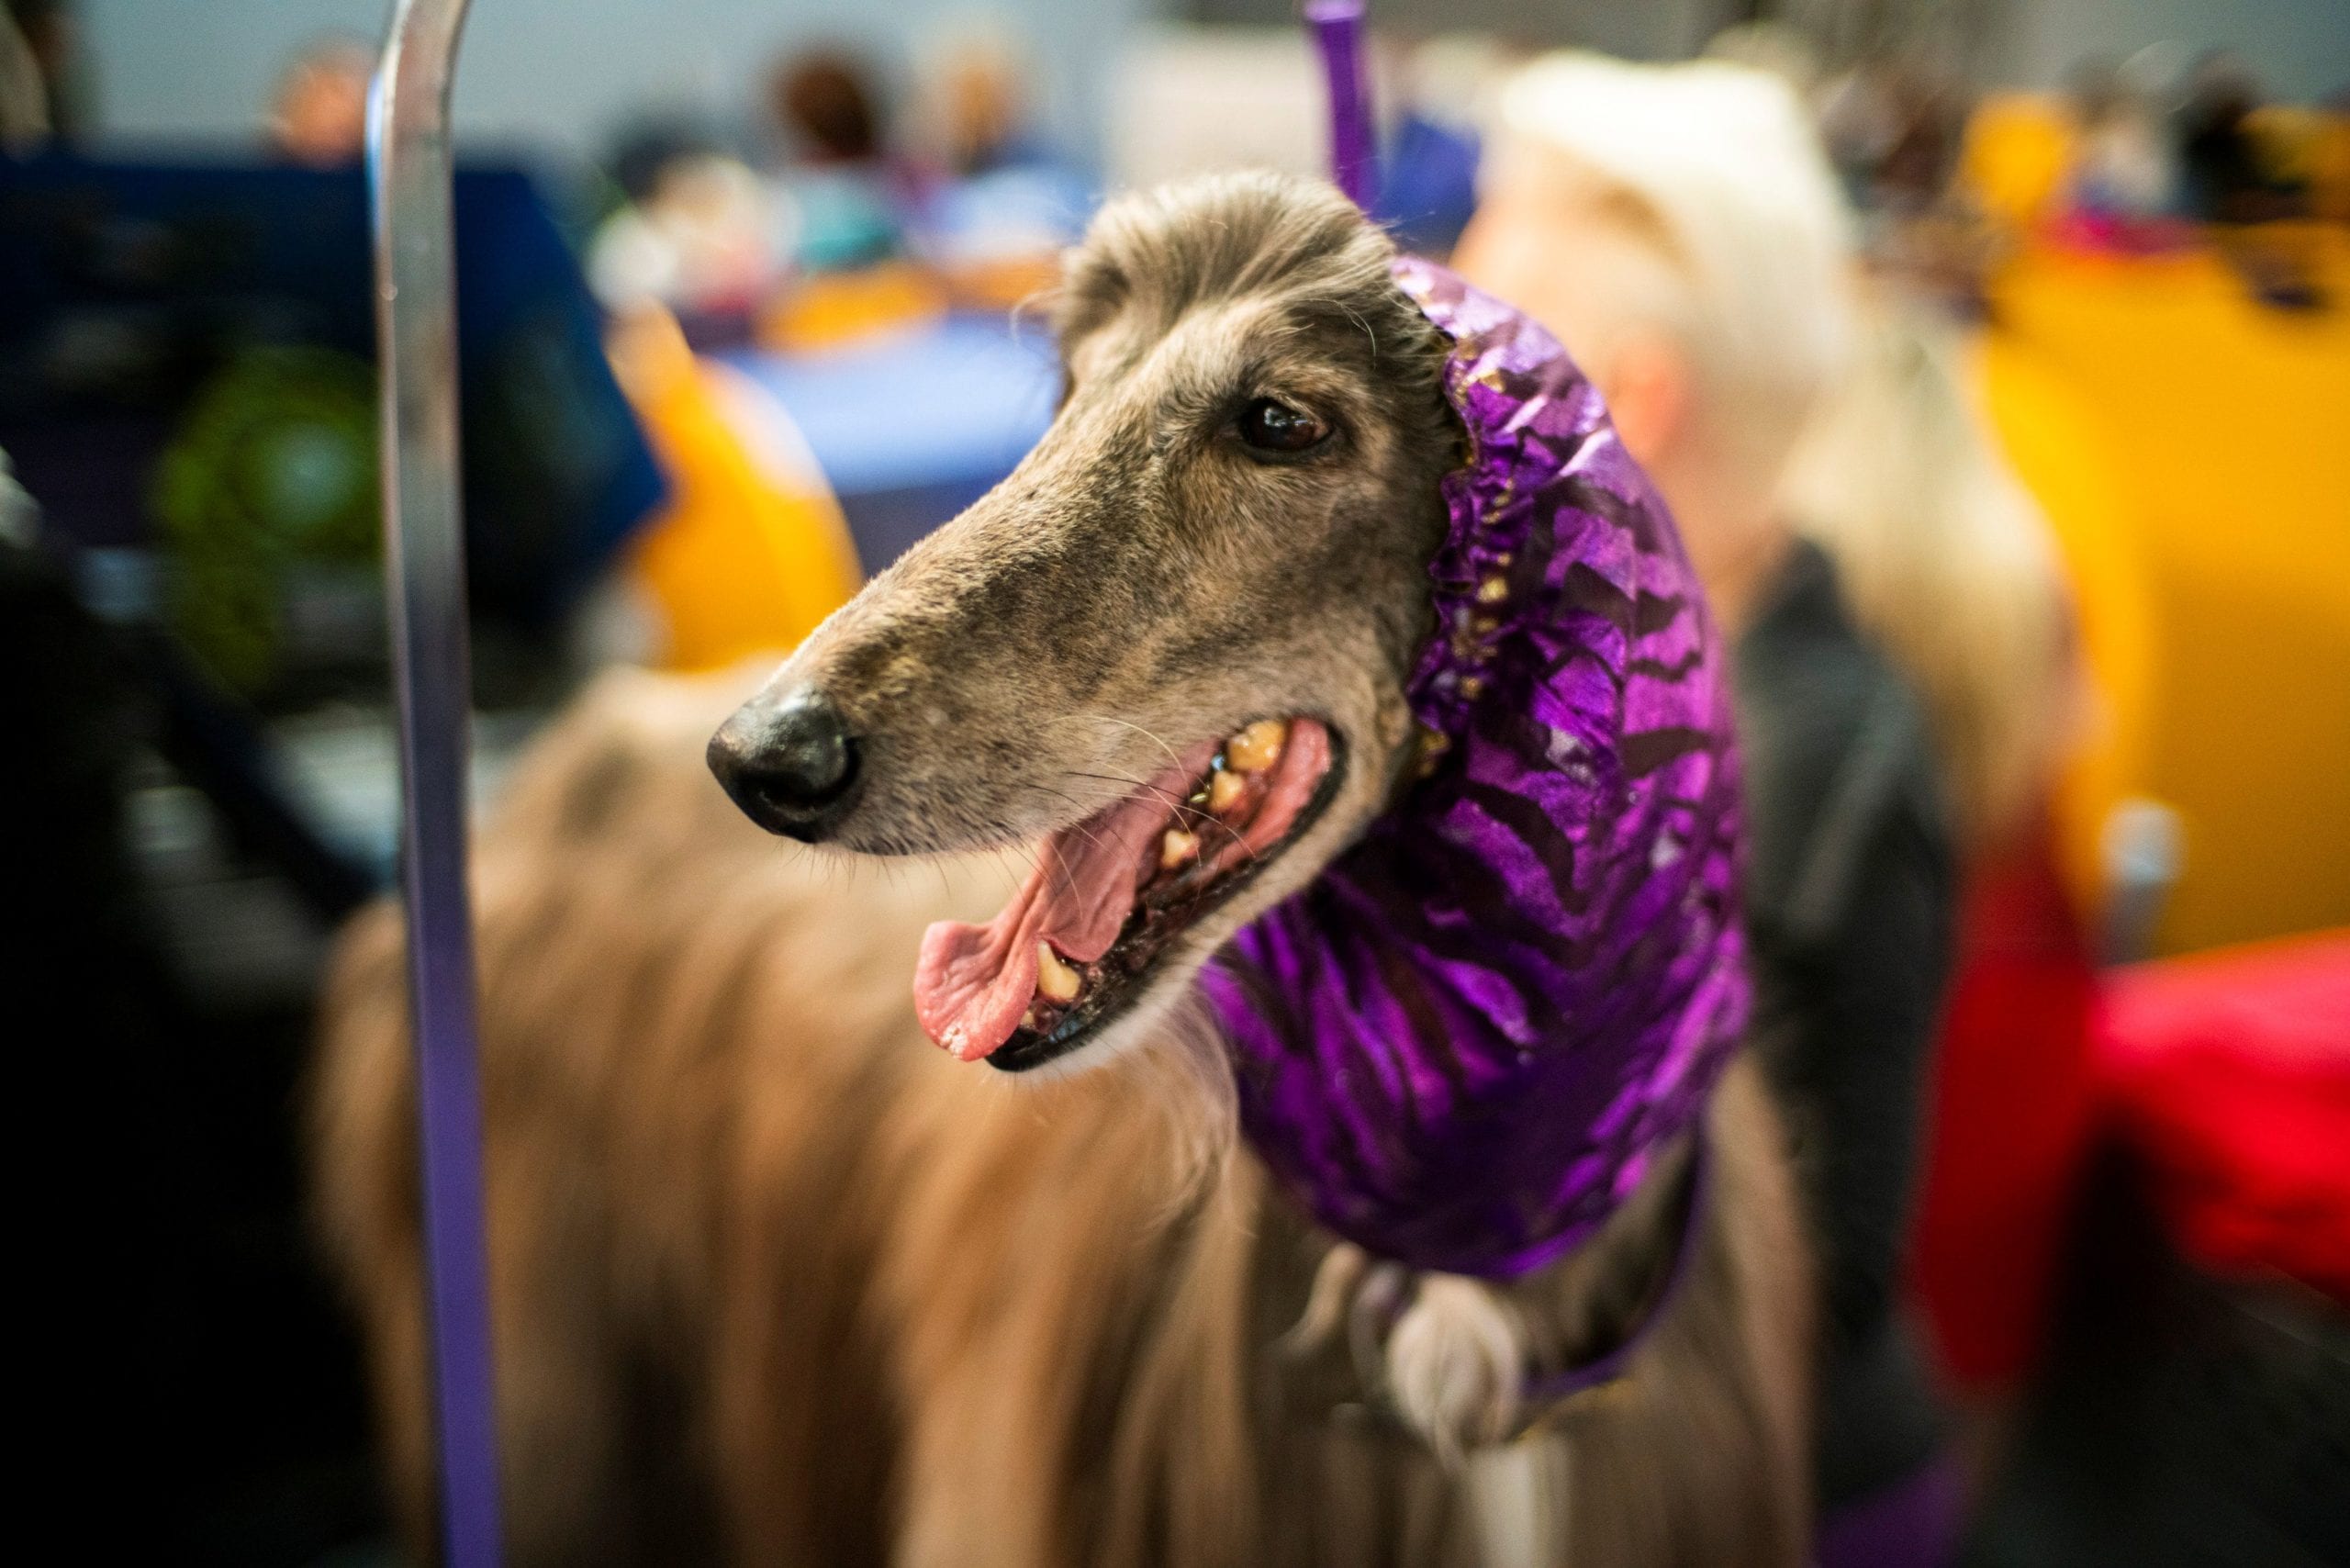 Afghan Hound gets ready at backstage before its performance during the Westminster Kennel Club Dog Show in New York, U.S., February 9, 2020. REUTERS/Eduardo Munoz